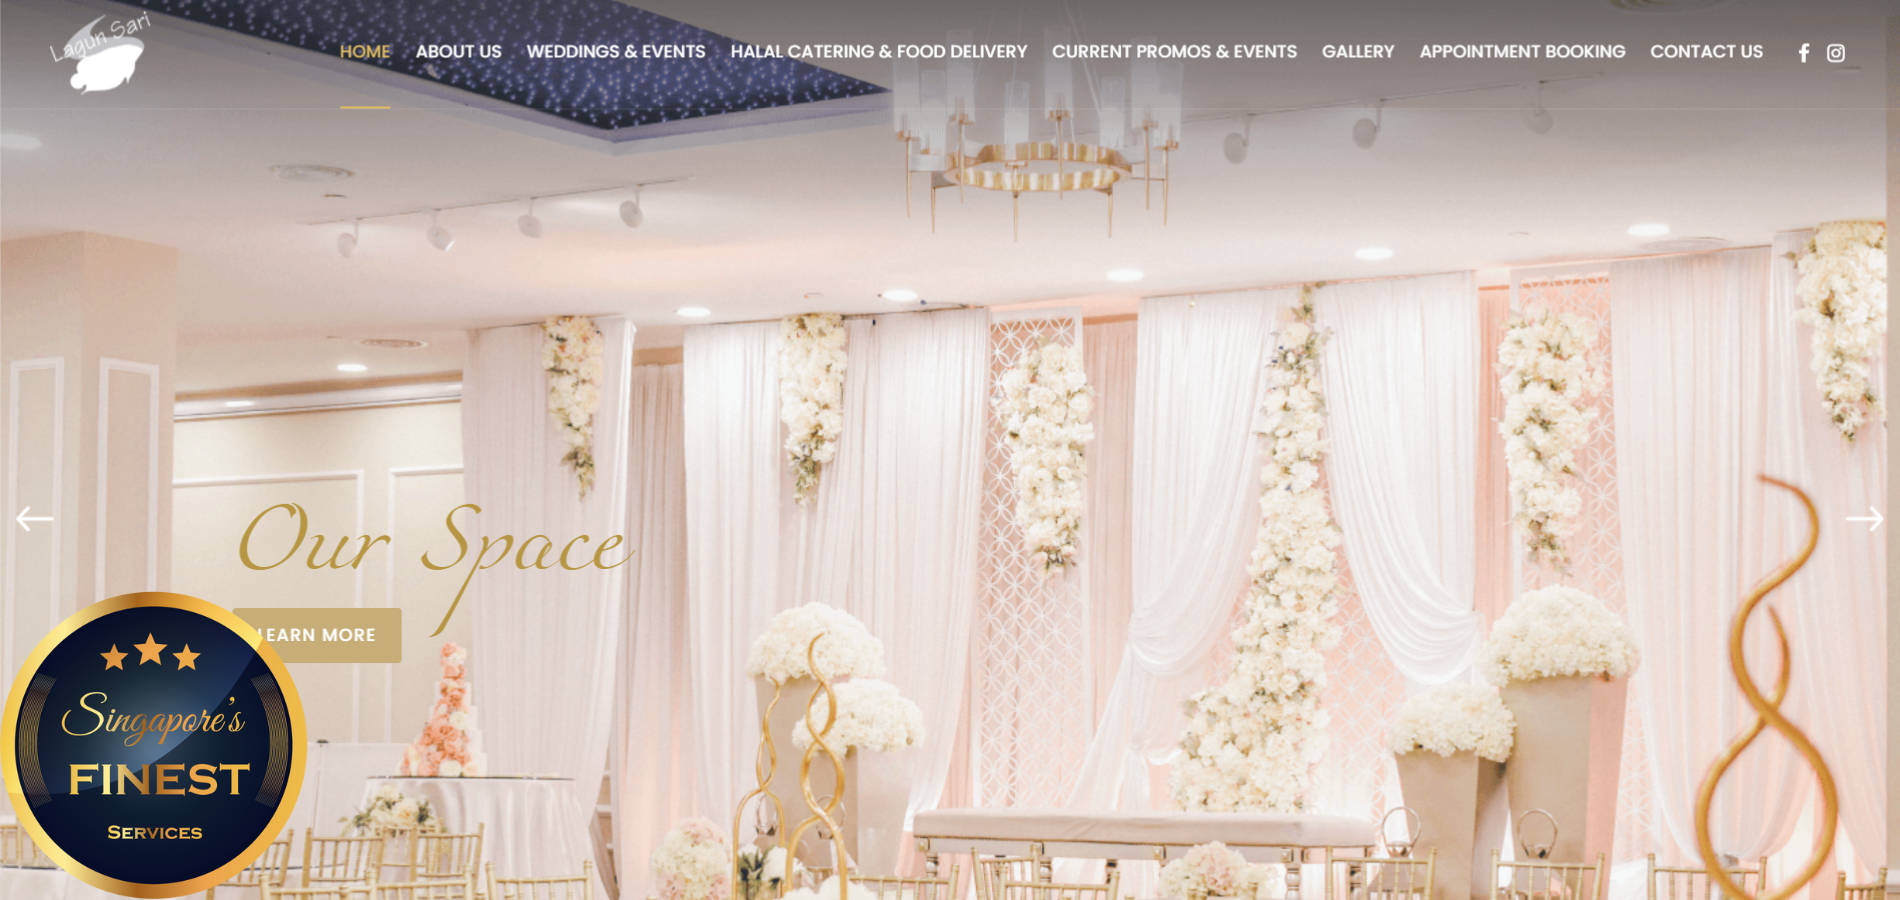 The Finest Malay Wedding Package Vendors in Singapore